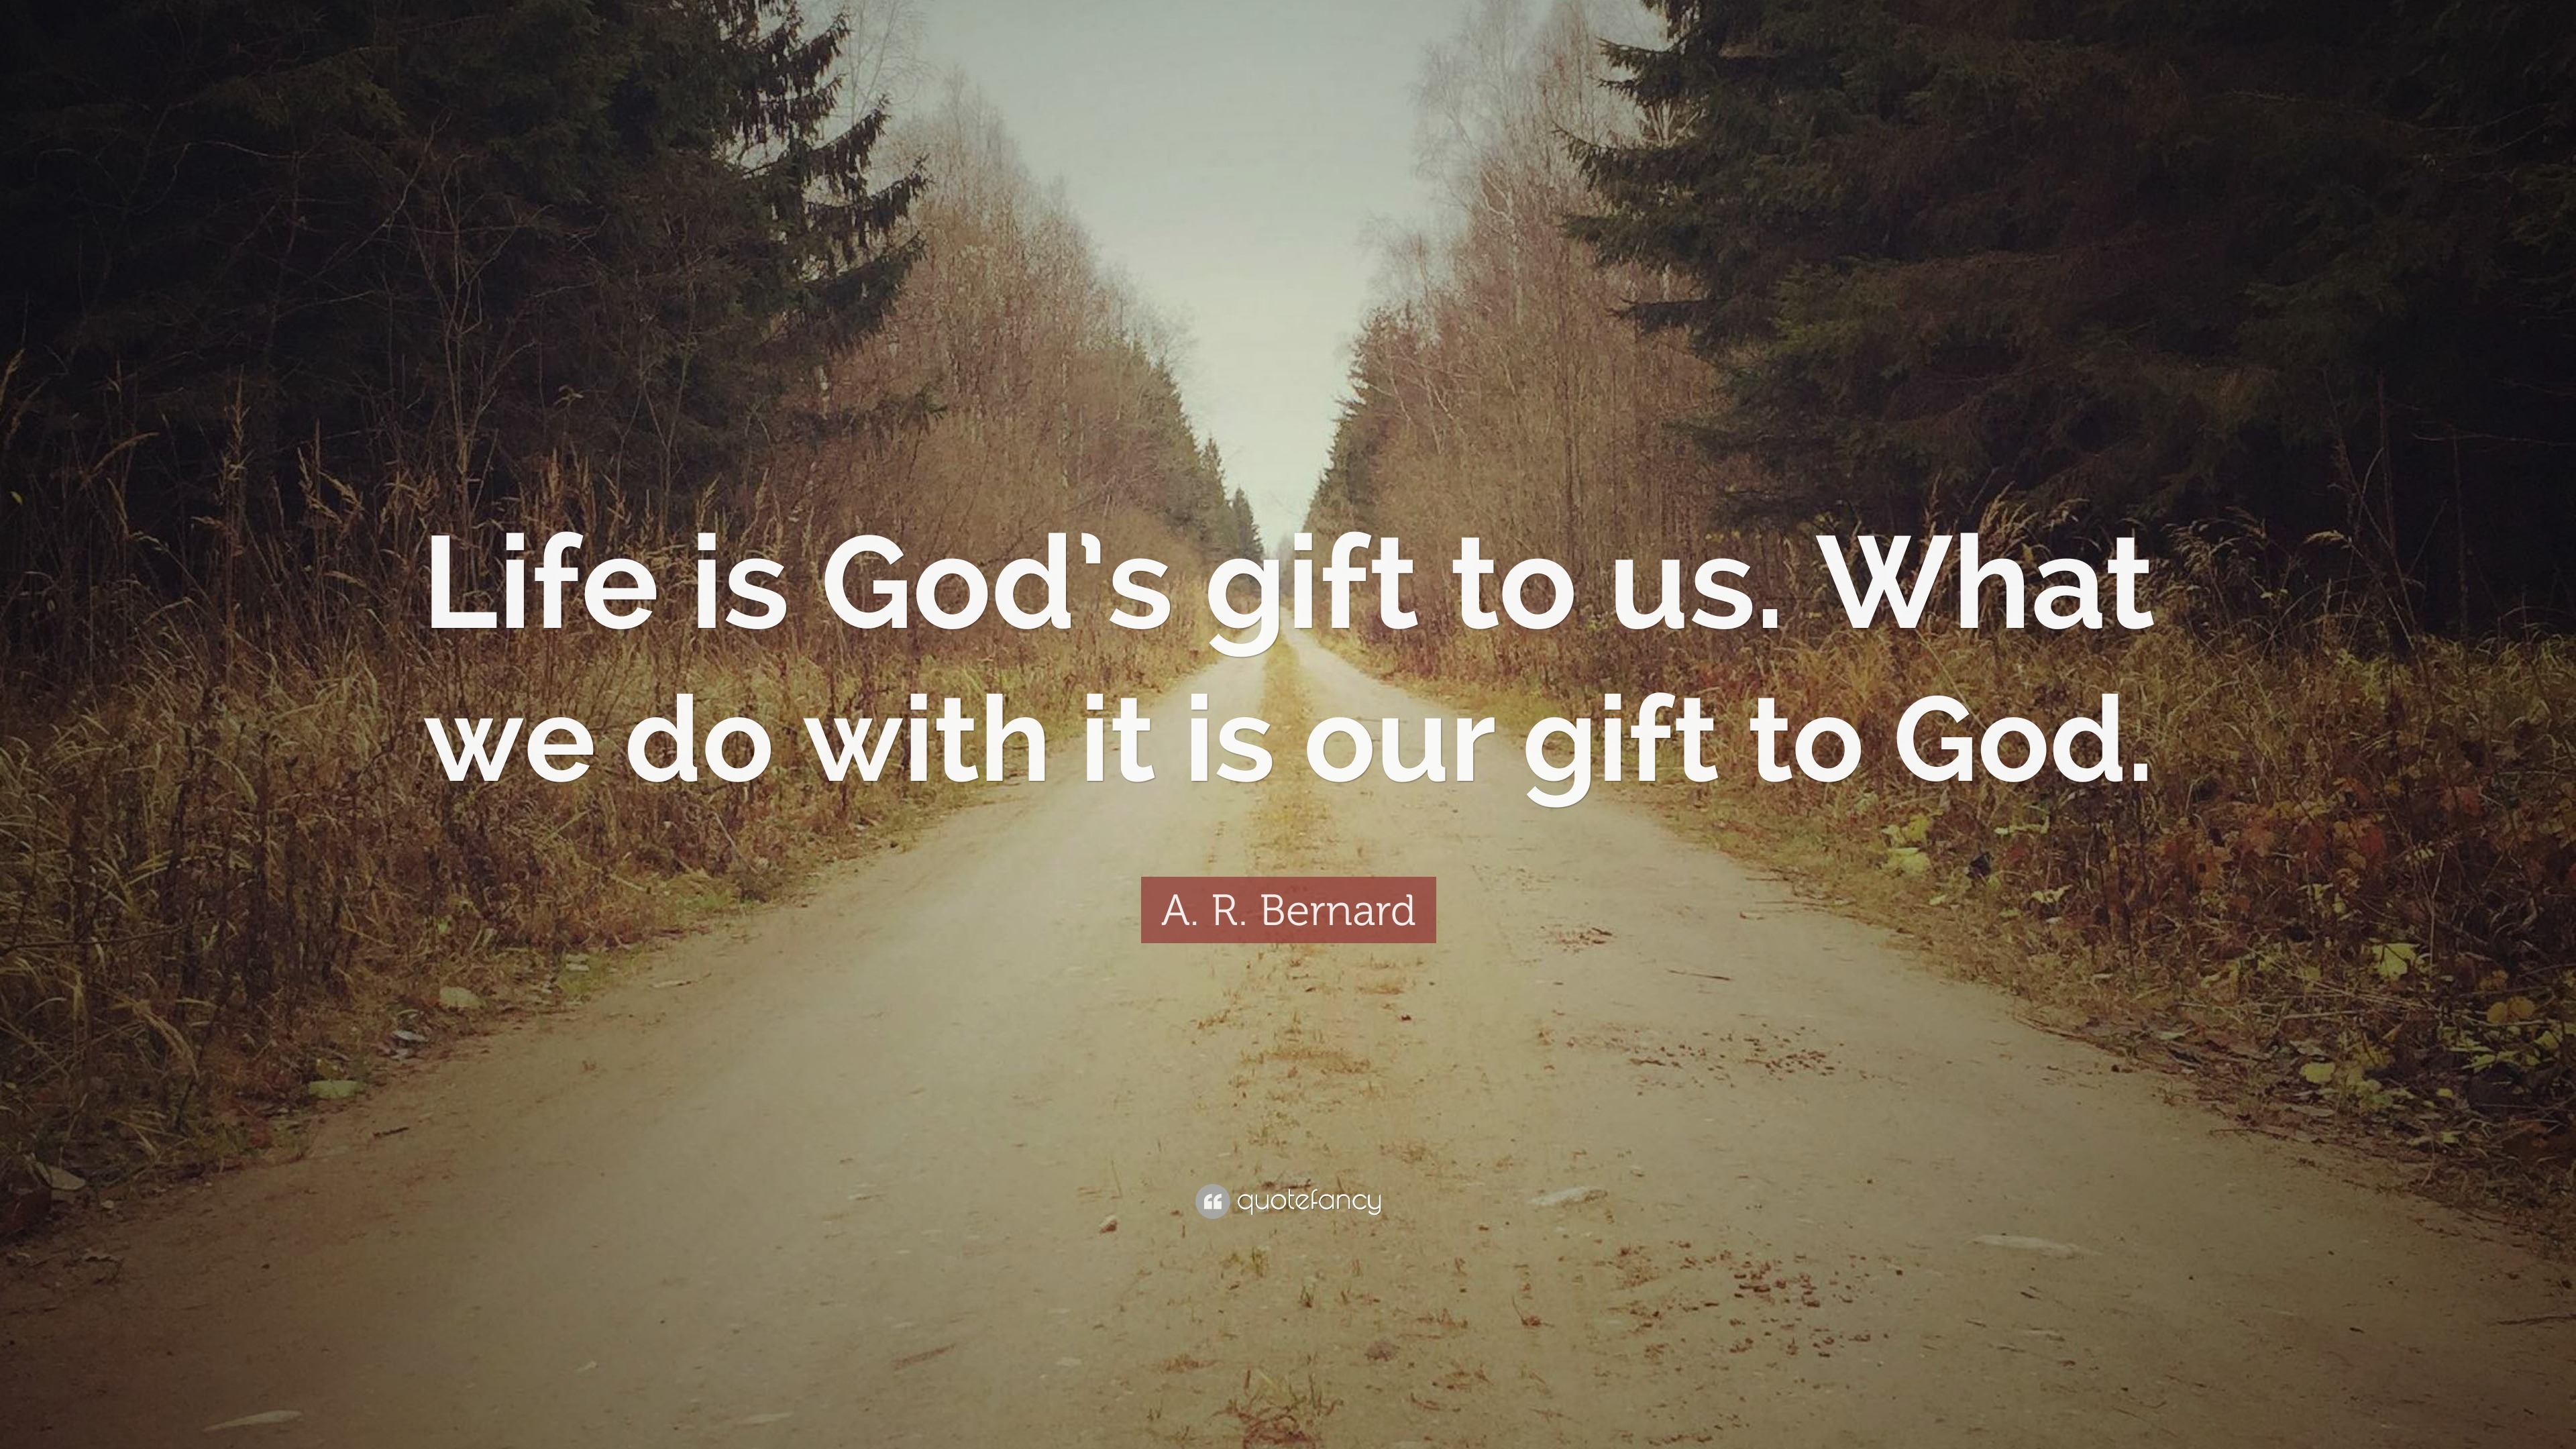 life is a gift from god essay